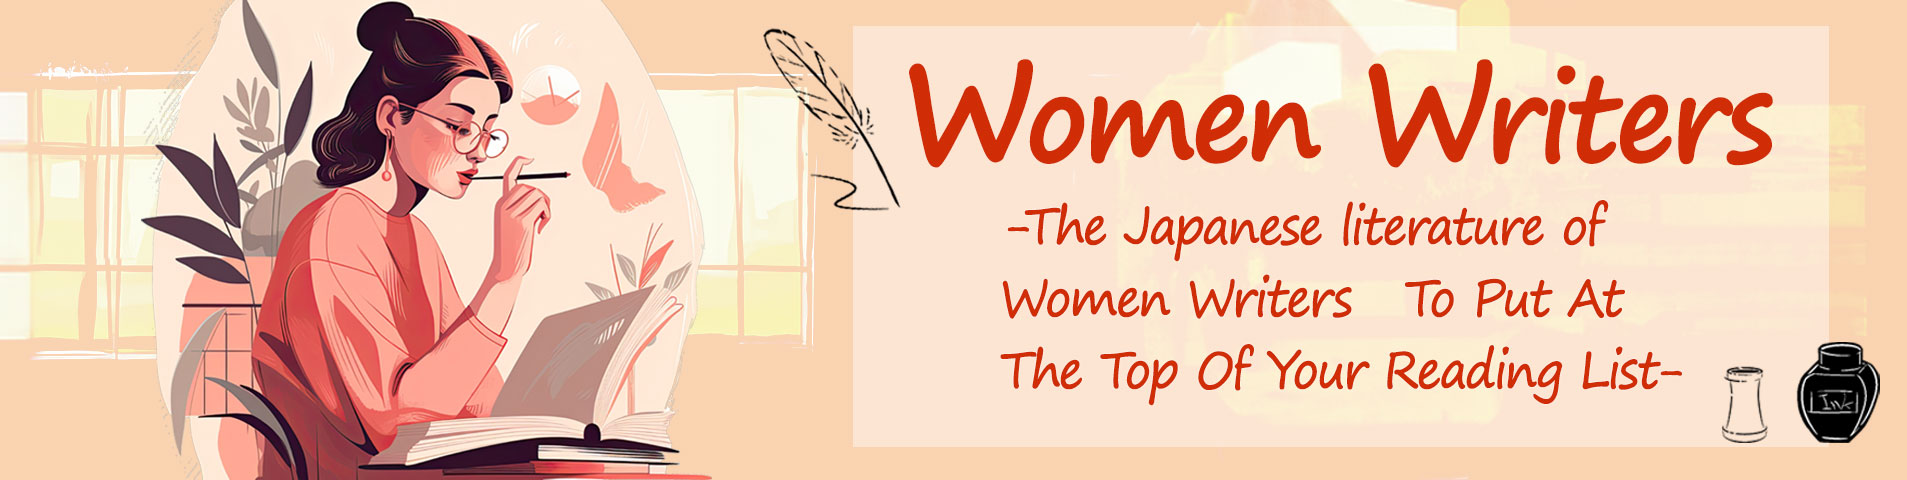 Women Writers   -The Japanese literature of Women Writers To Put At The Top Of Your Reading List-